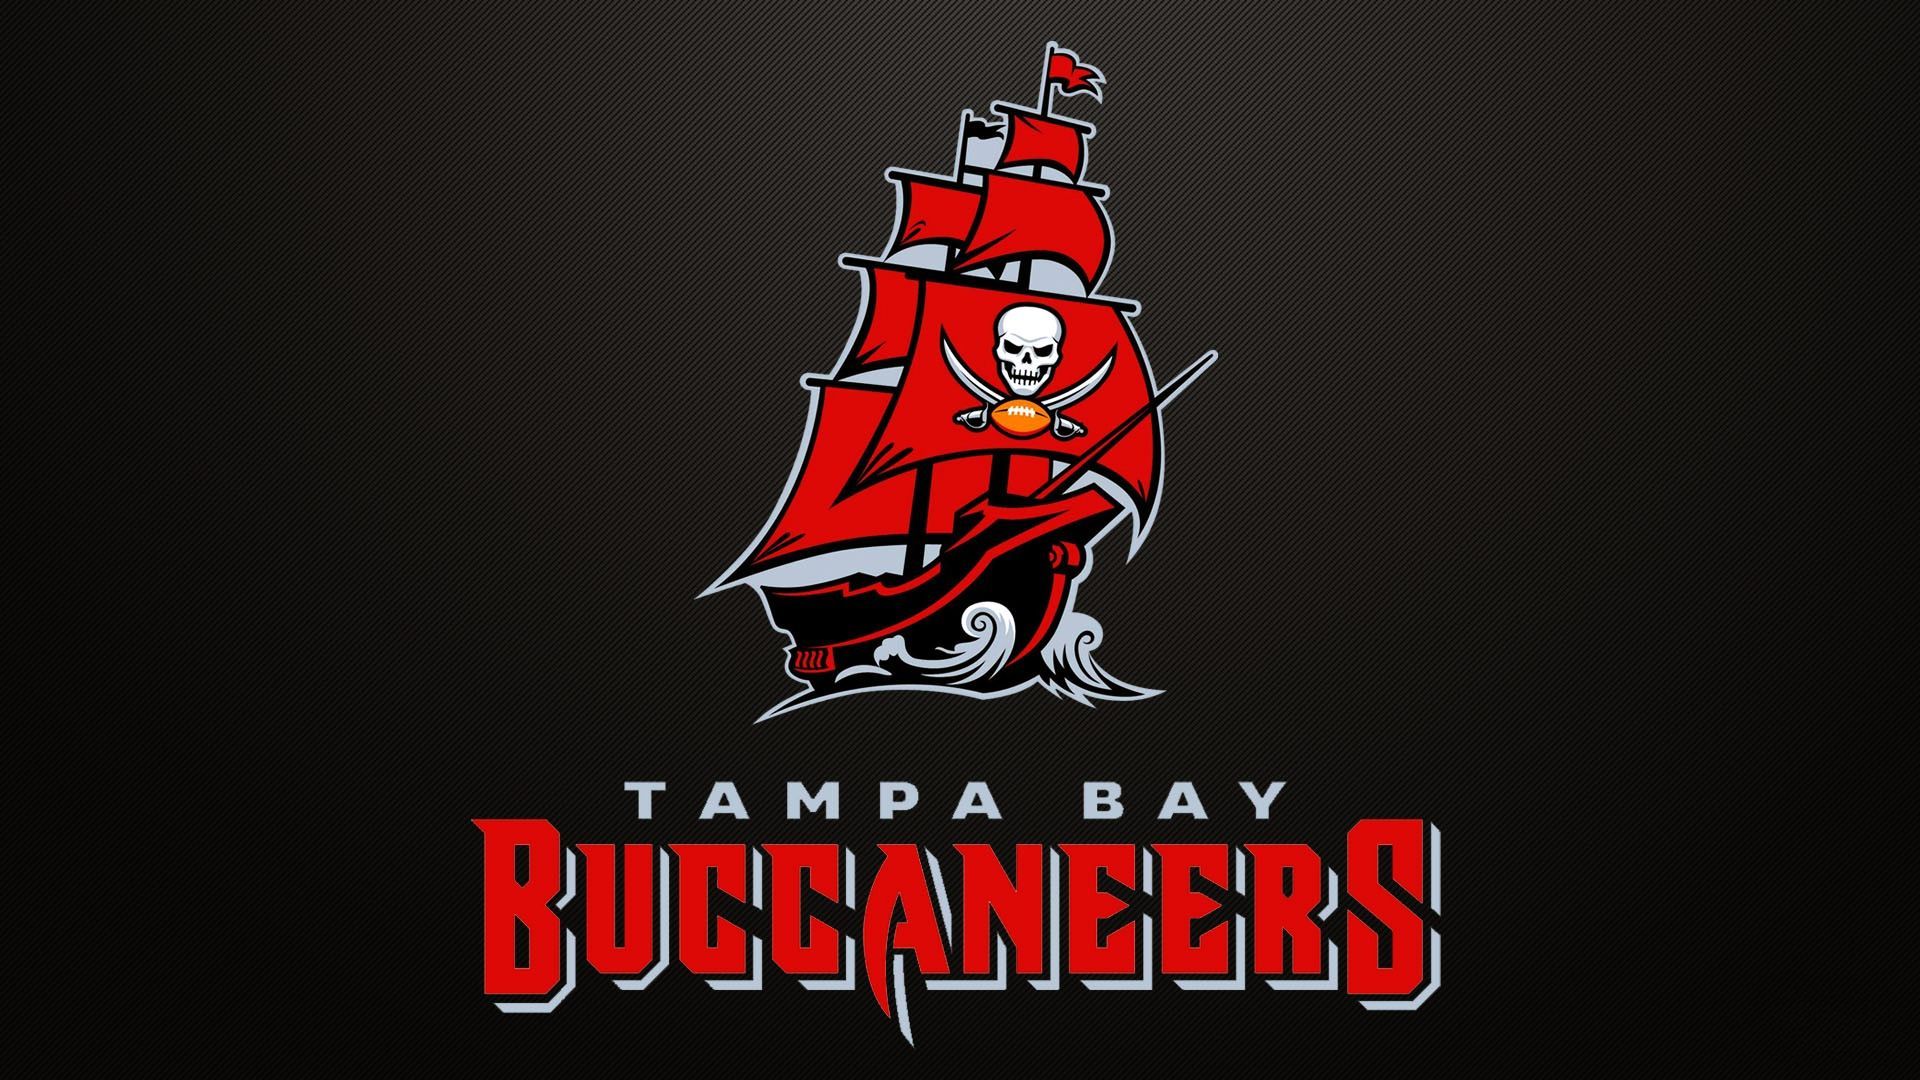 Share more than 72 buccaneers wallpaper super hot - in.cdgdbentre